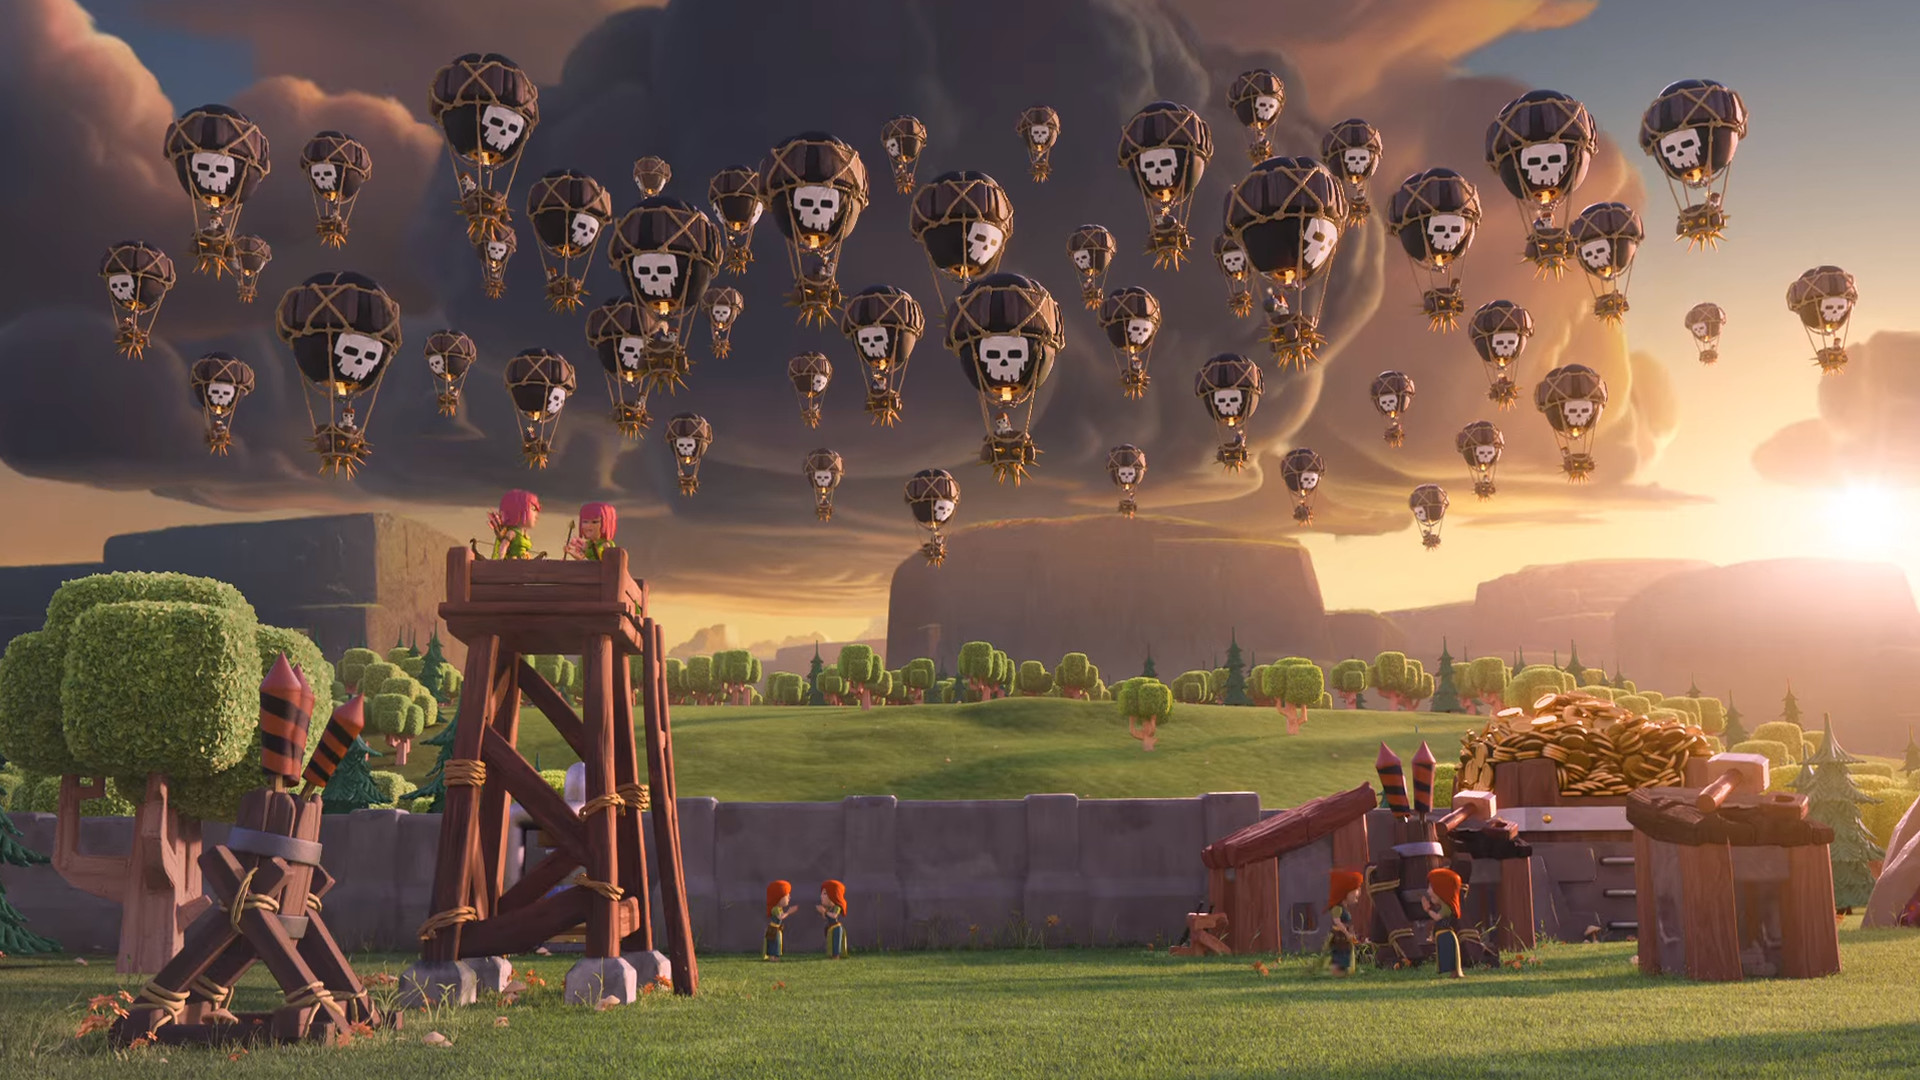 1920x1080 Clash of Clans Wallpaper - clash of clans - balloon parade - hd wallpaper